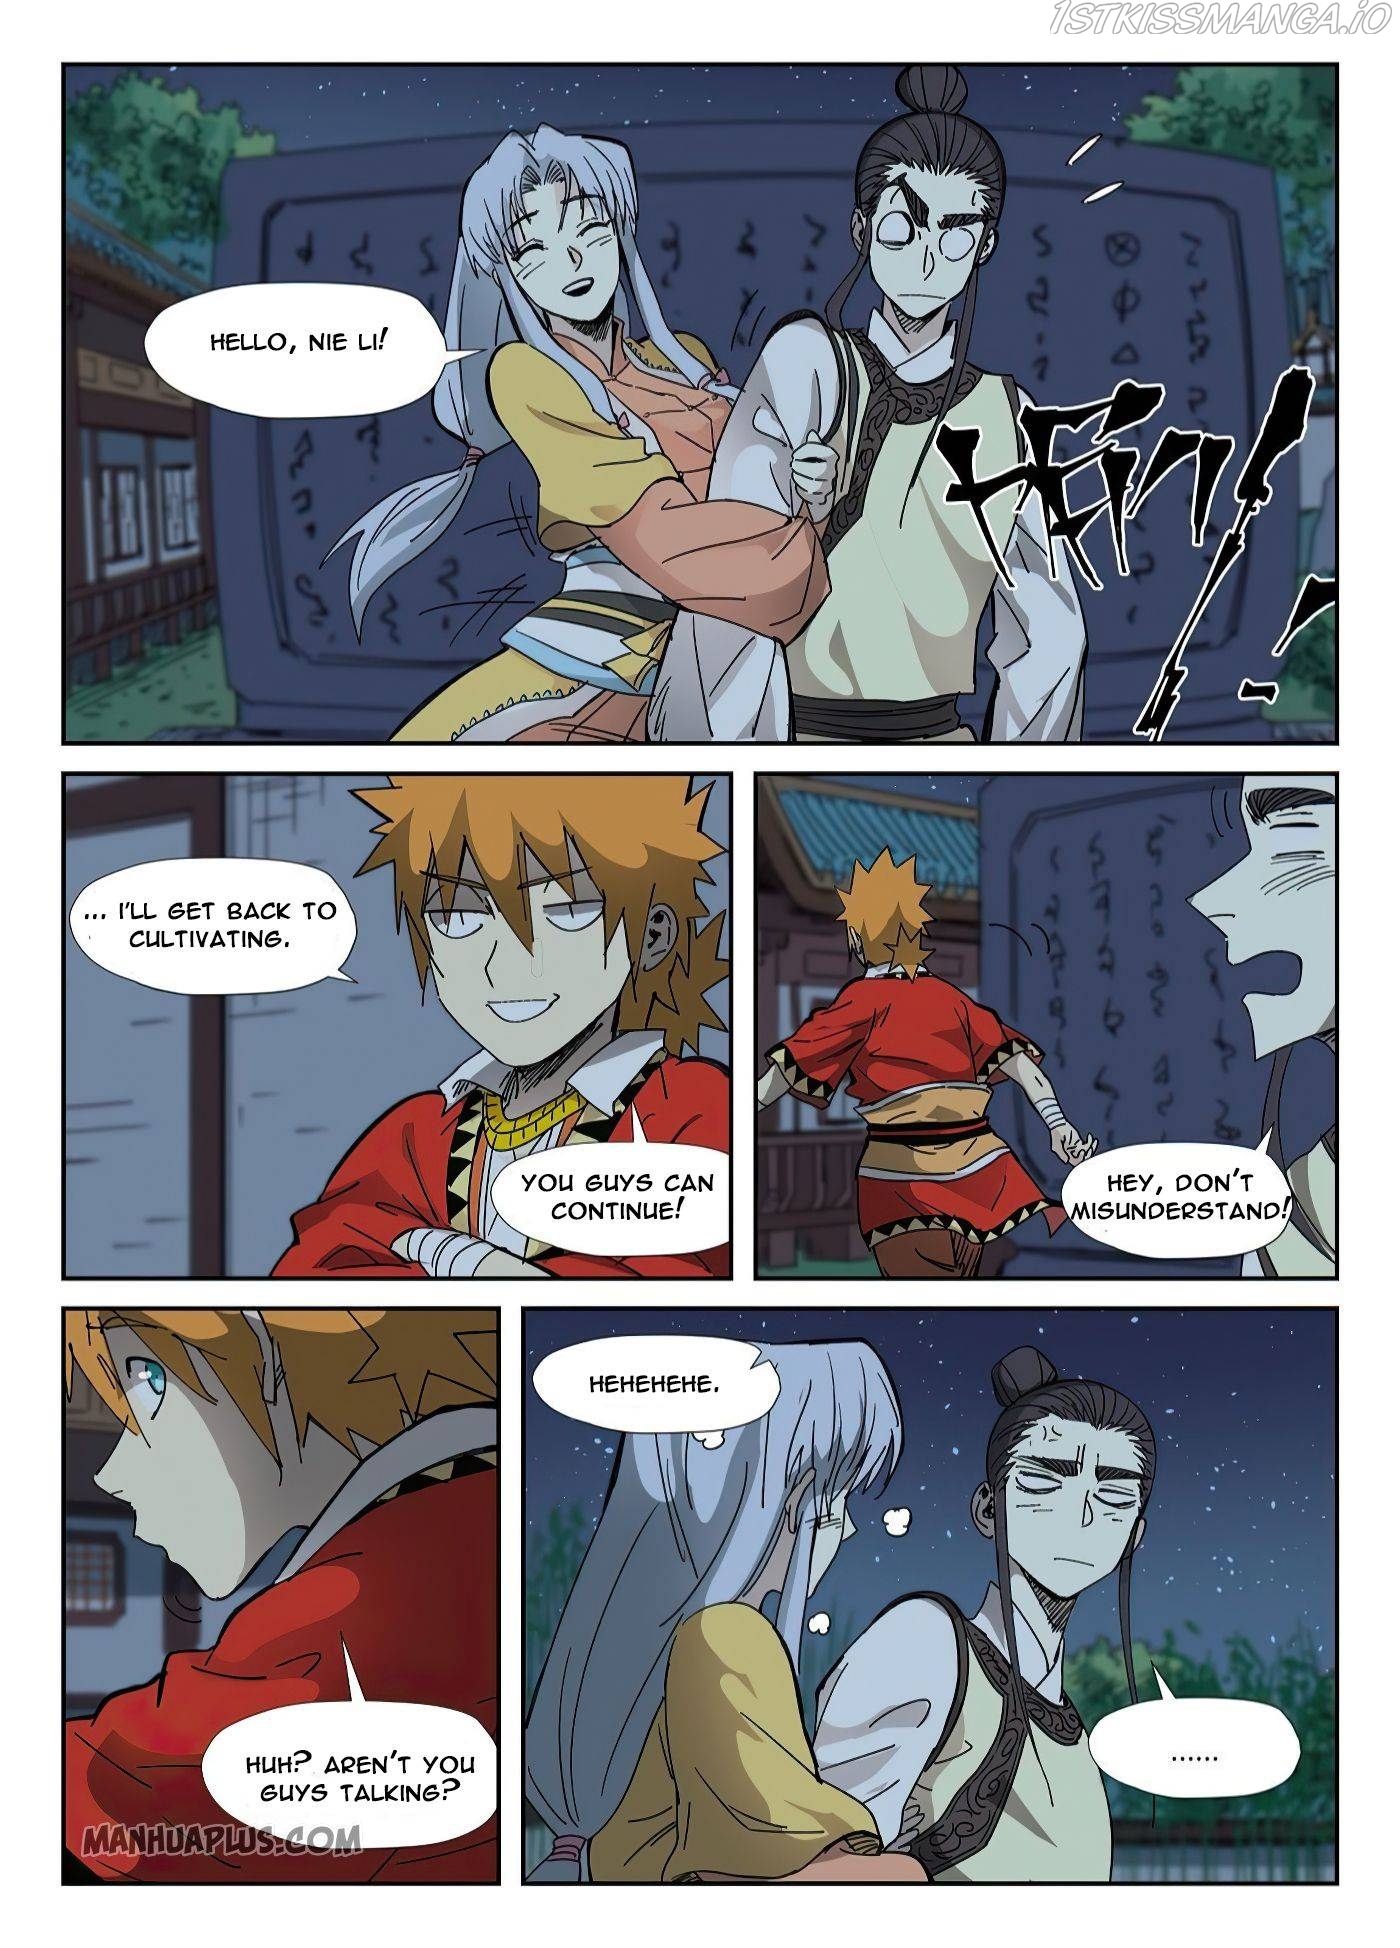 Tales of Demons and Gods Manhua Chapter 330.5 - Page 3